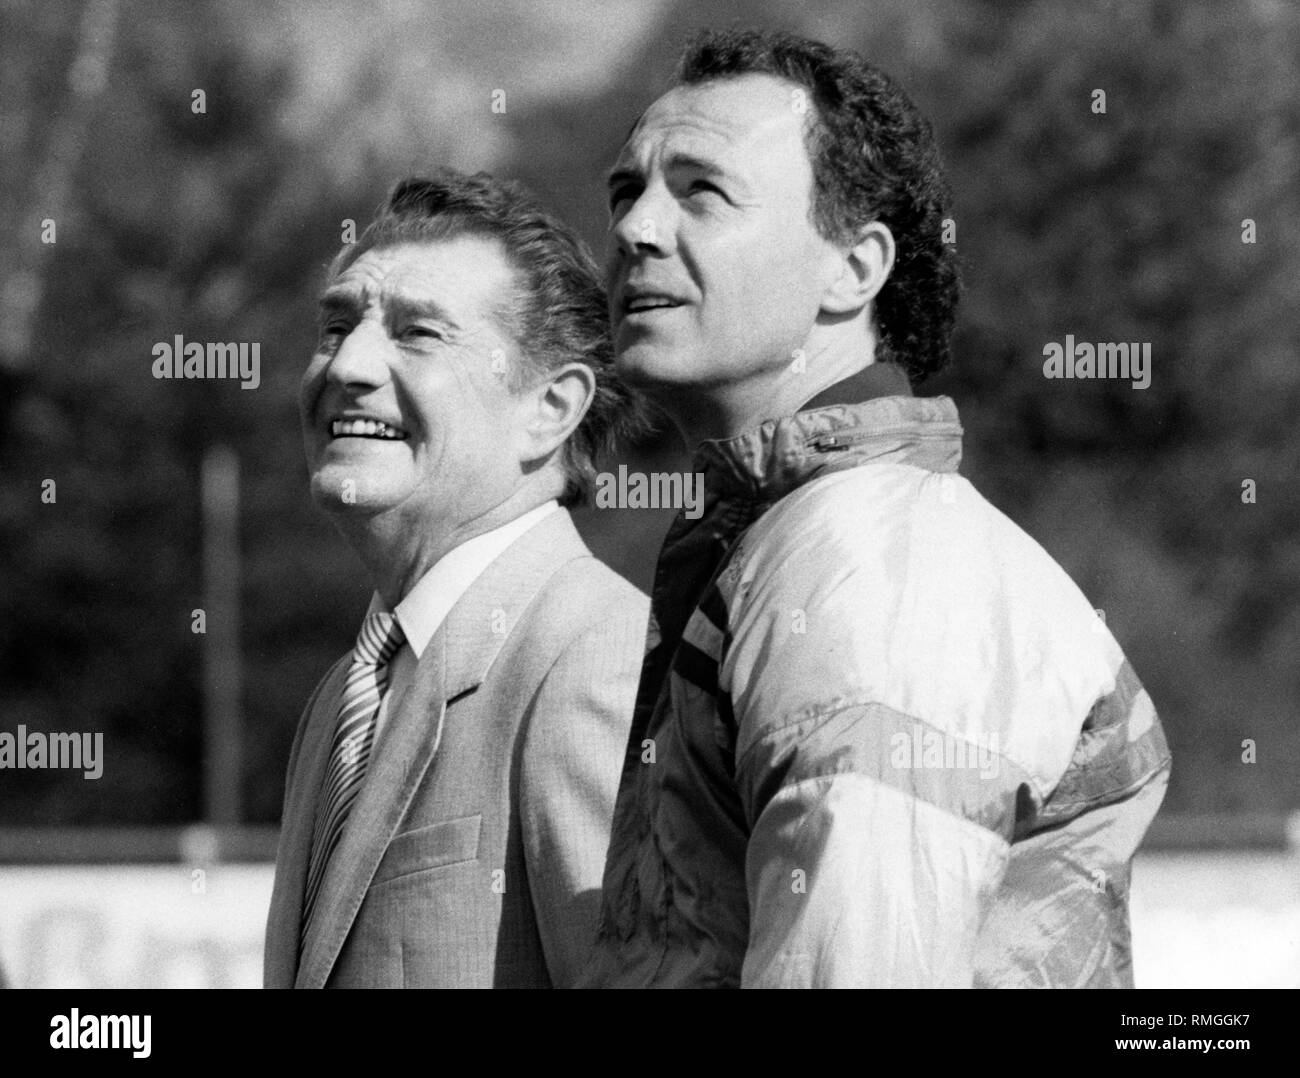 The two honorary captains of the German national team Franz Beckenbauer (right) and Fritz Walter in the Fritz Walter Stadium before the international match. Stock Photo